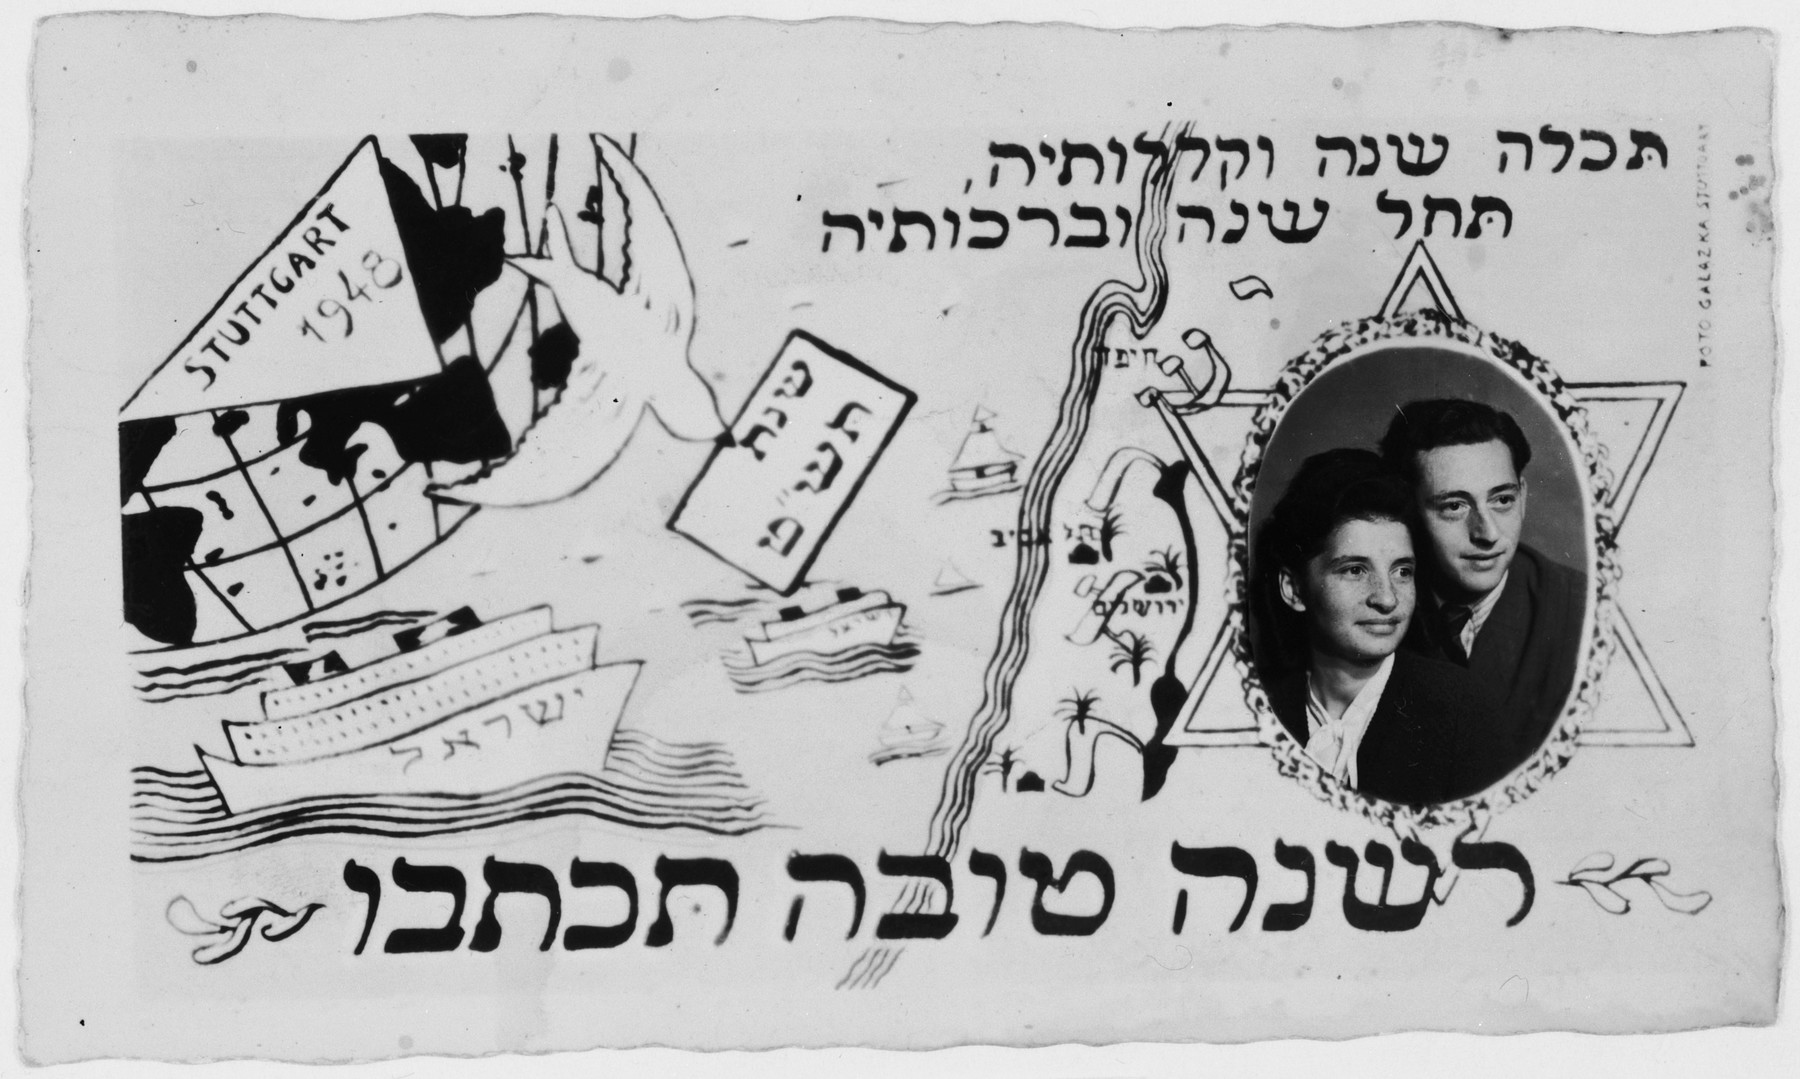 Personalized Jewish New Years card sent by Fela and Natan Gipsman, a Jewish DP couple living in Stuttgart, Germany.

The card is decorated with a map of Israel and a boat labeled with the Hebrew word for Israel, a reference to the newly declared independant State of Israel.